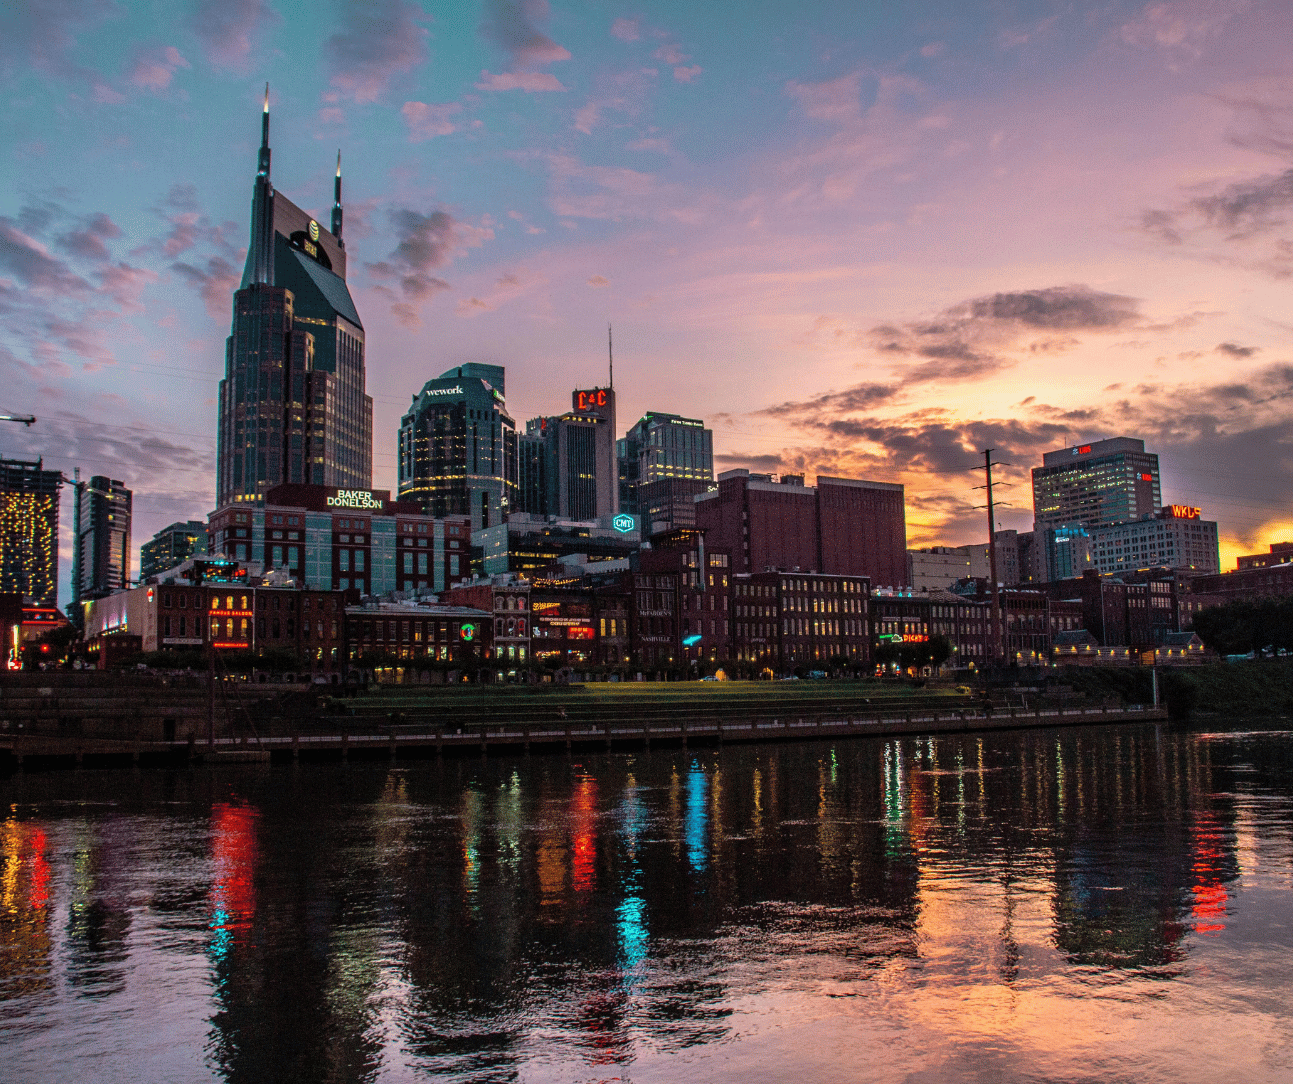 Panoramic view of the Nashville skyline at dusk, showcasing prominent buildings and the vibrant cityscape. The image represents the dynamic and bustling environment of Nashville, Tennessee, home to the Cole Law Group.